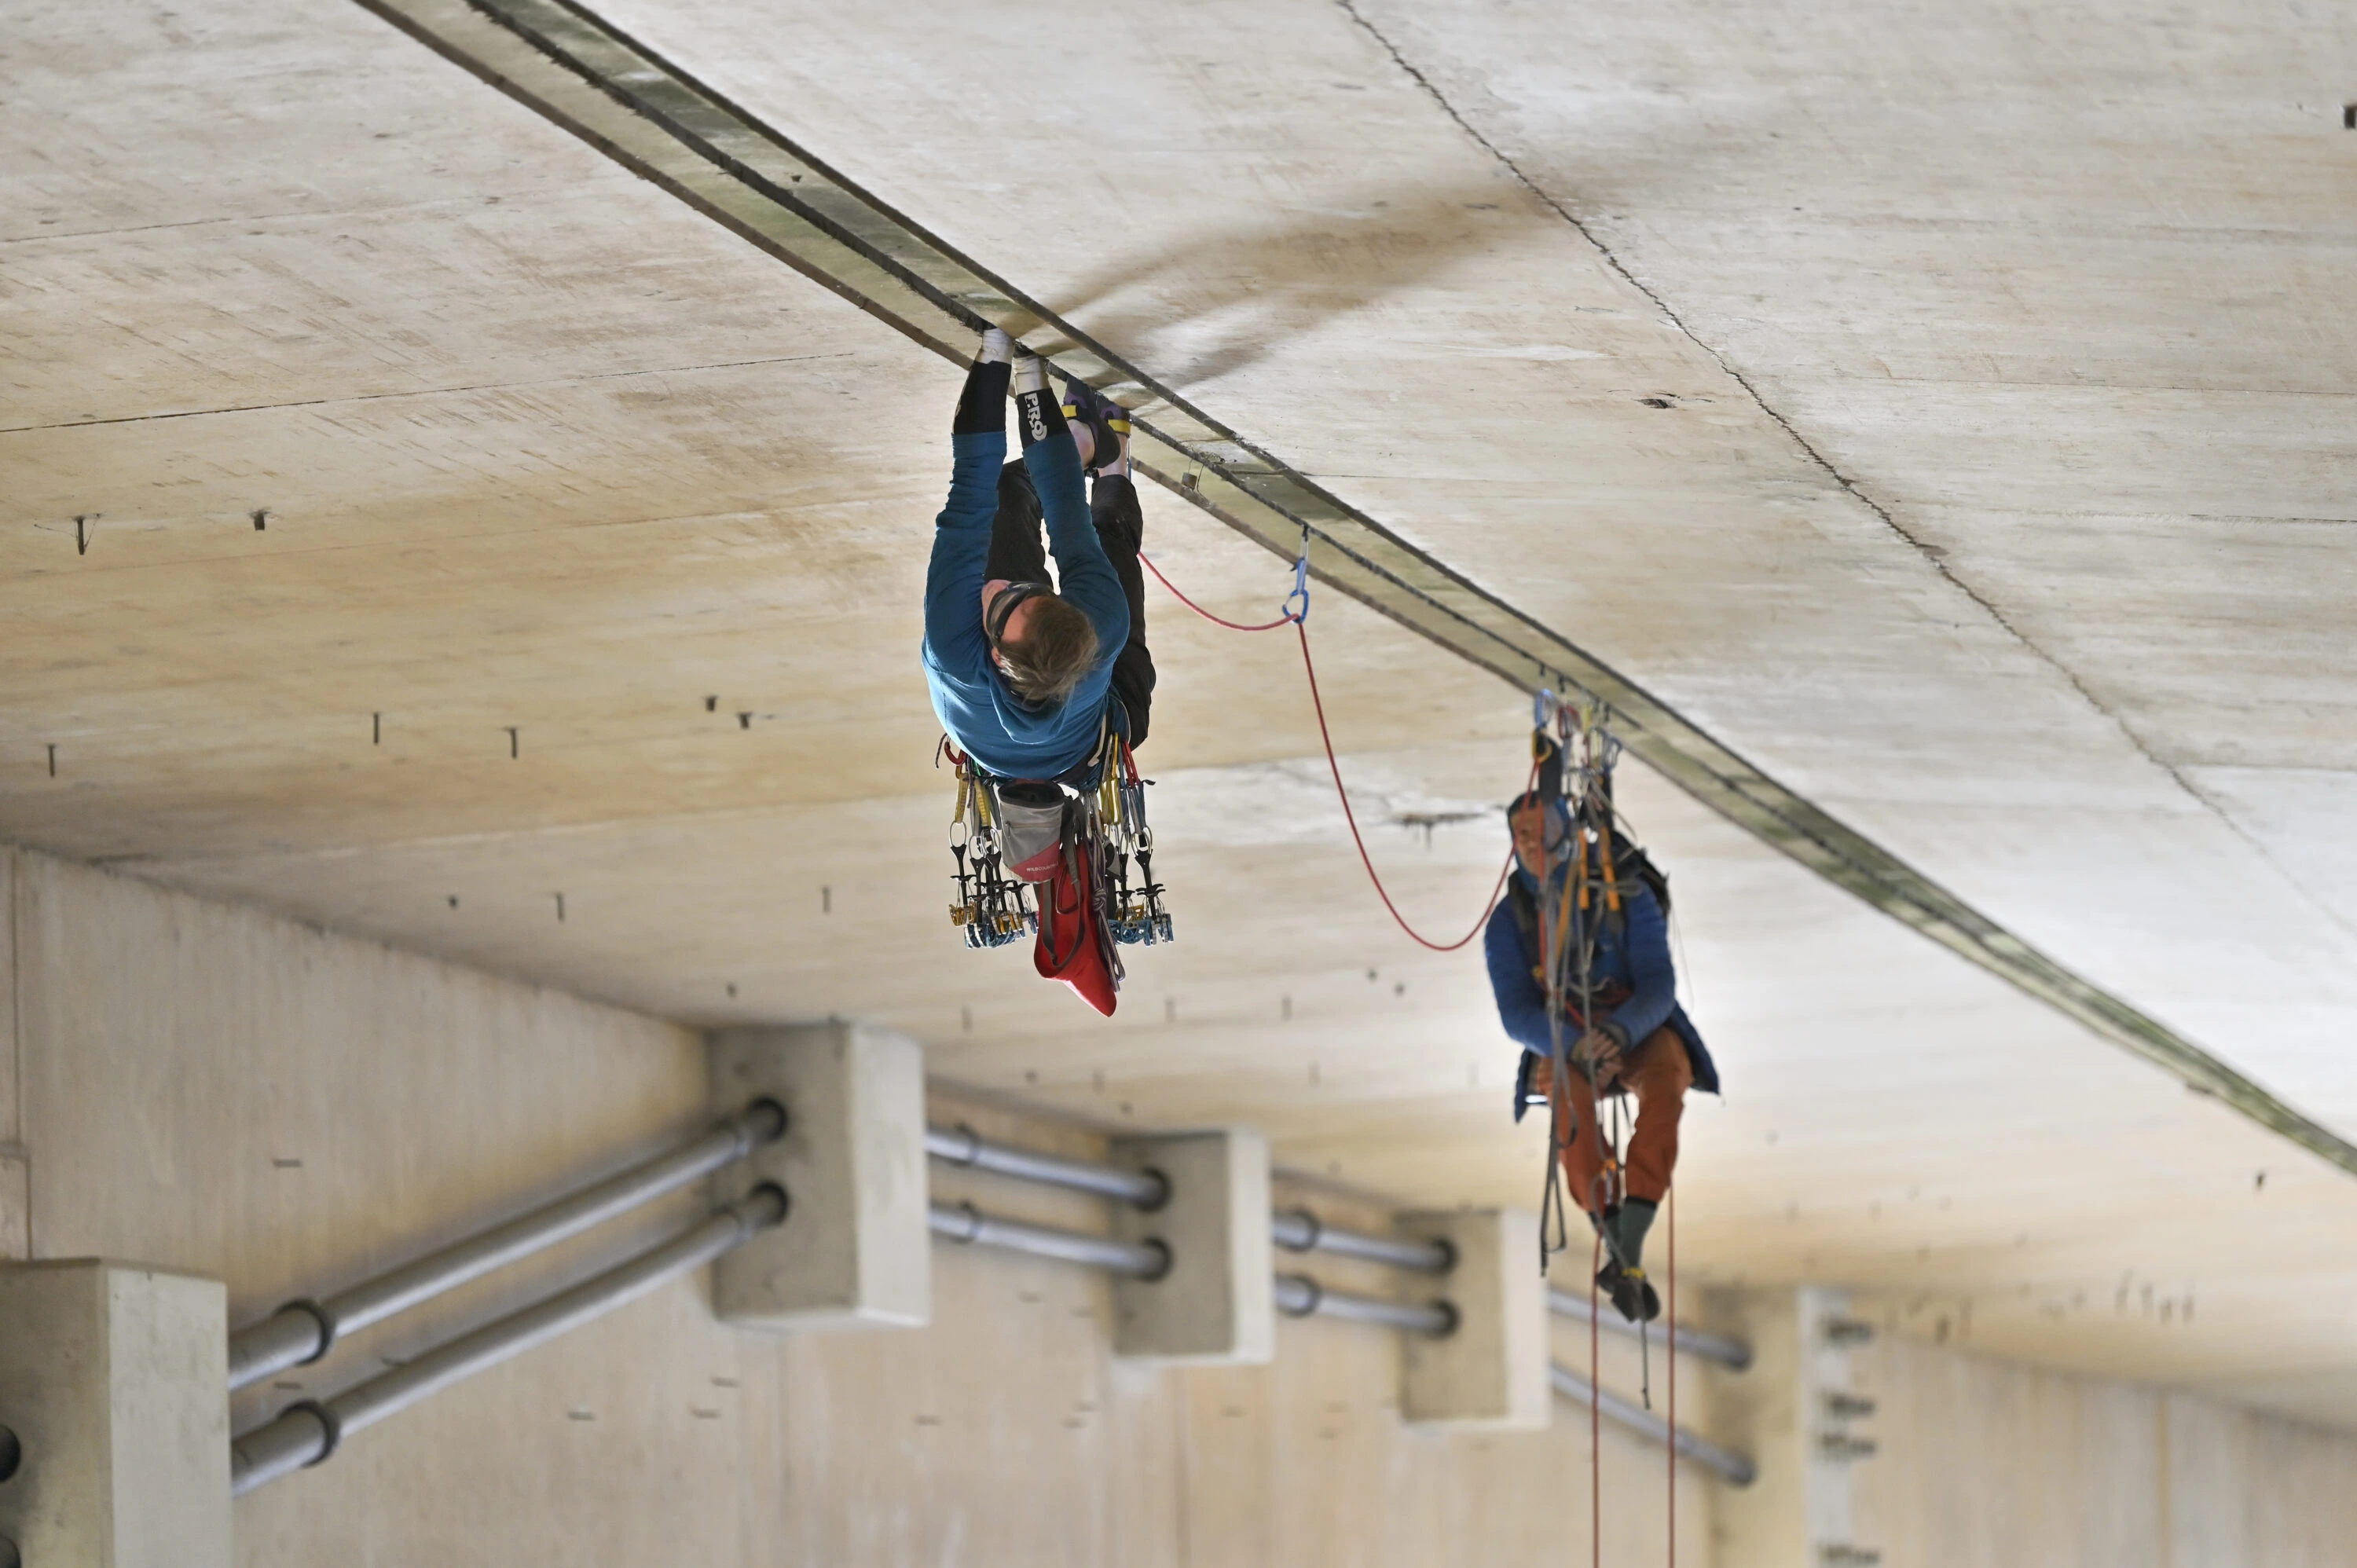 Two climbers climbing along a gap in the underside of a motorway bridge in the UK